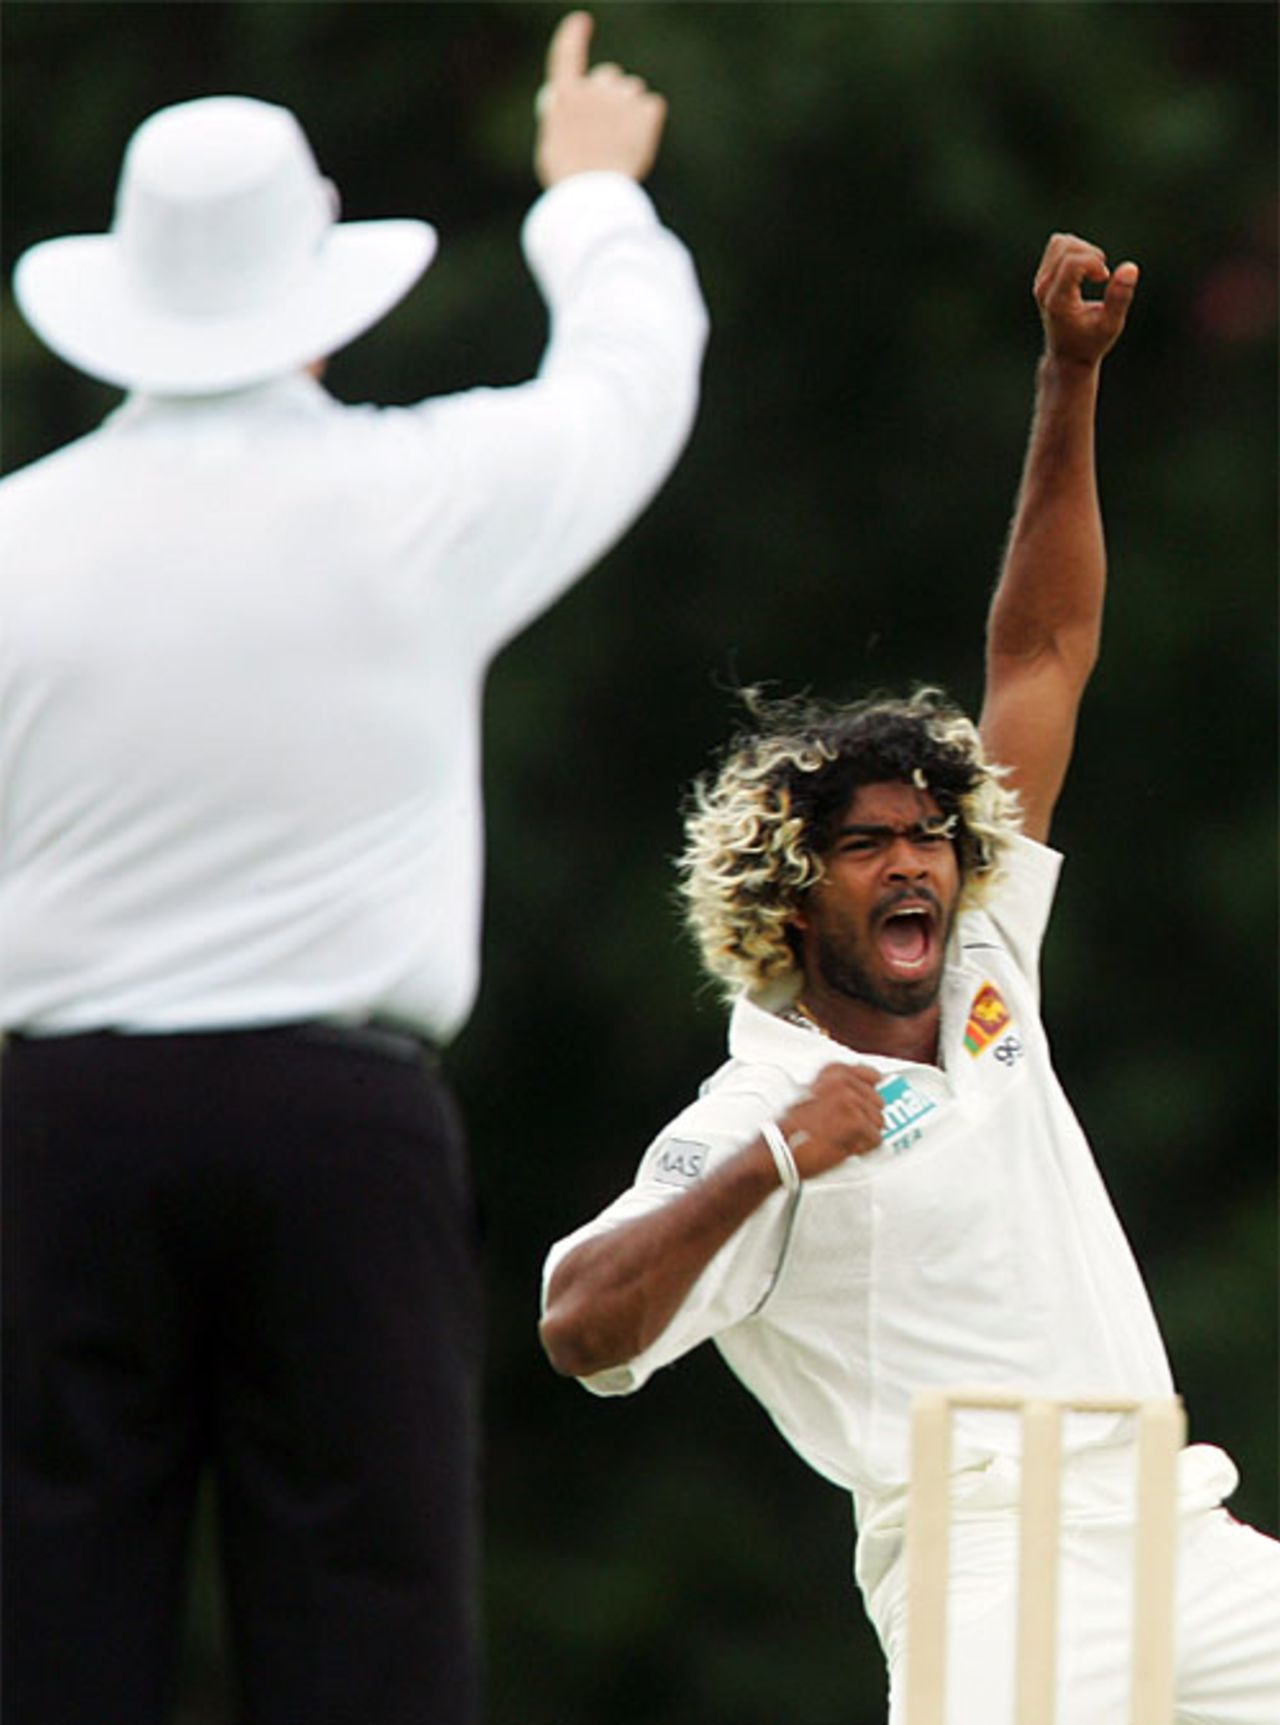 Lasith Malinga struck early for the Sri Lankans, trapping Jimmy Maher for 4, Queensland v Sri Lankans, 3rd day, Brisbane, November 2, 2007